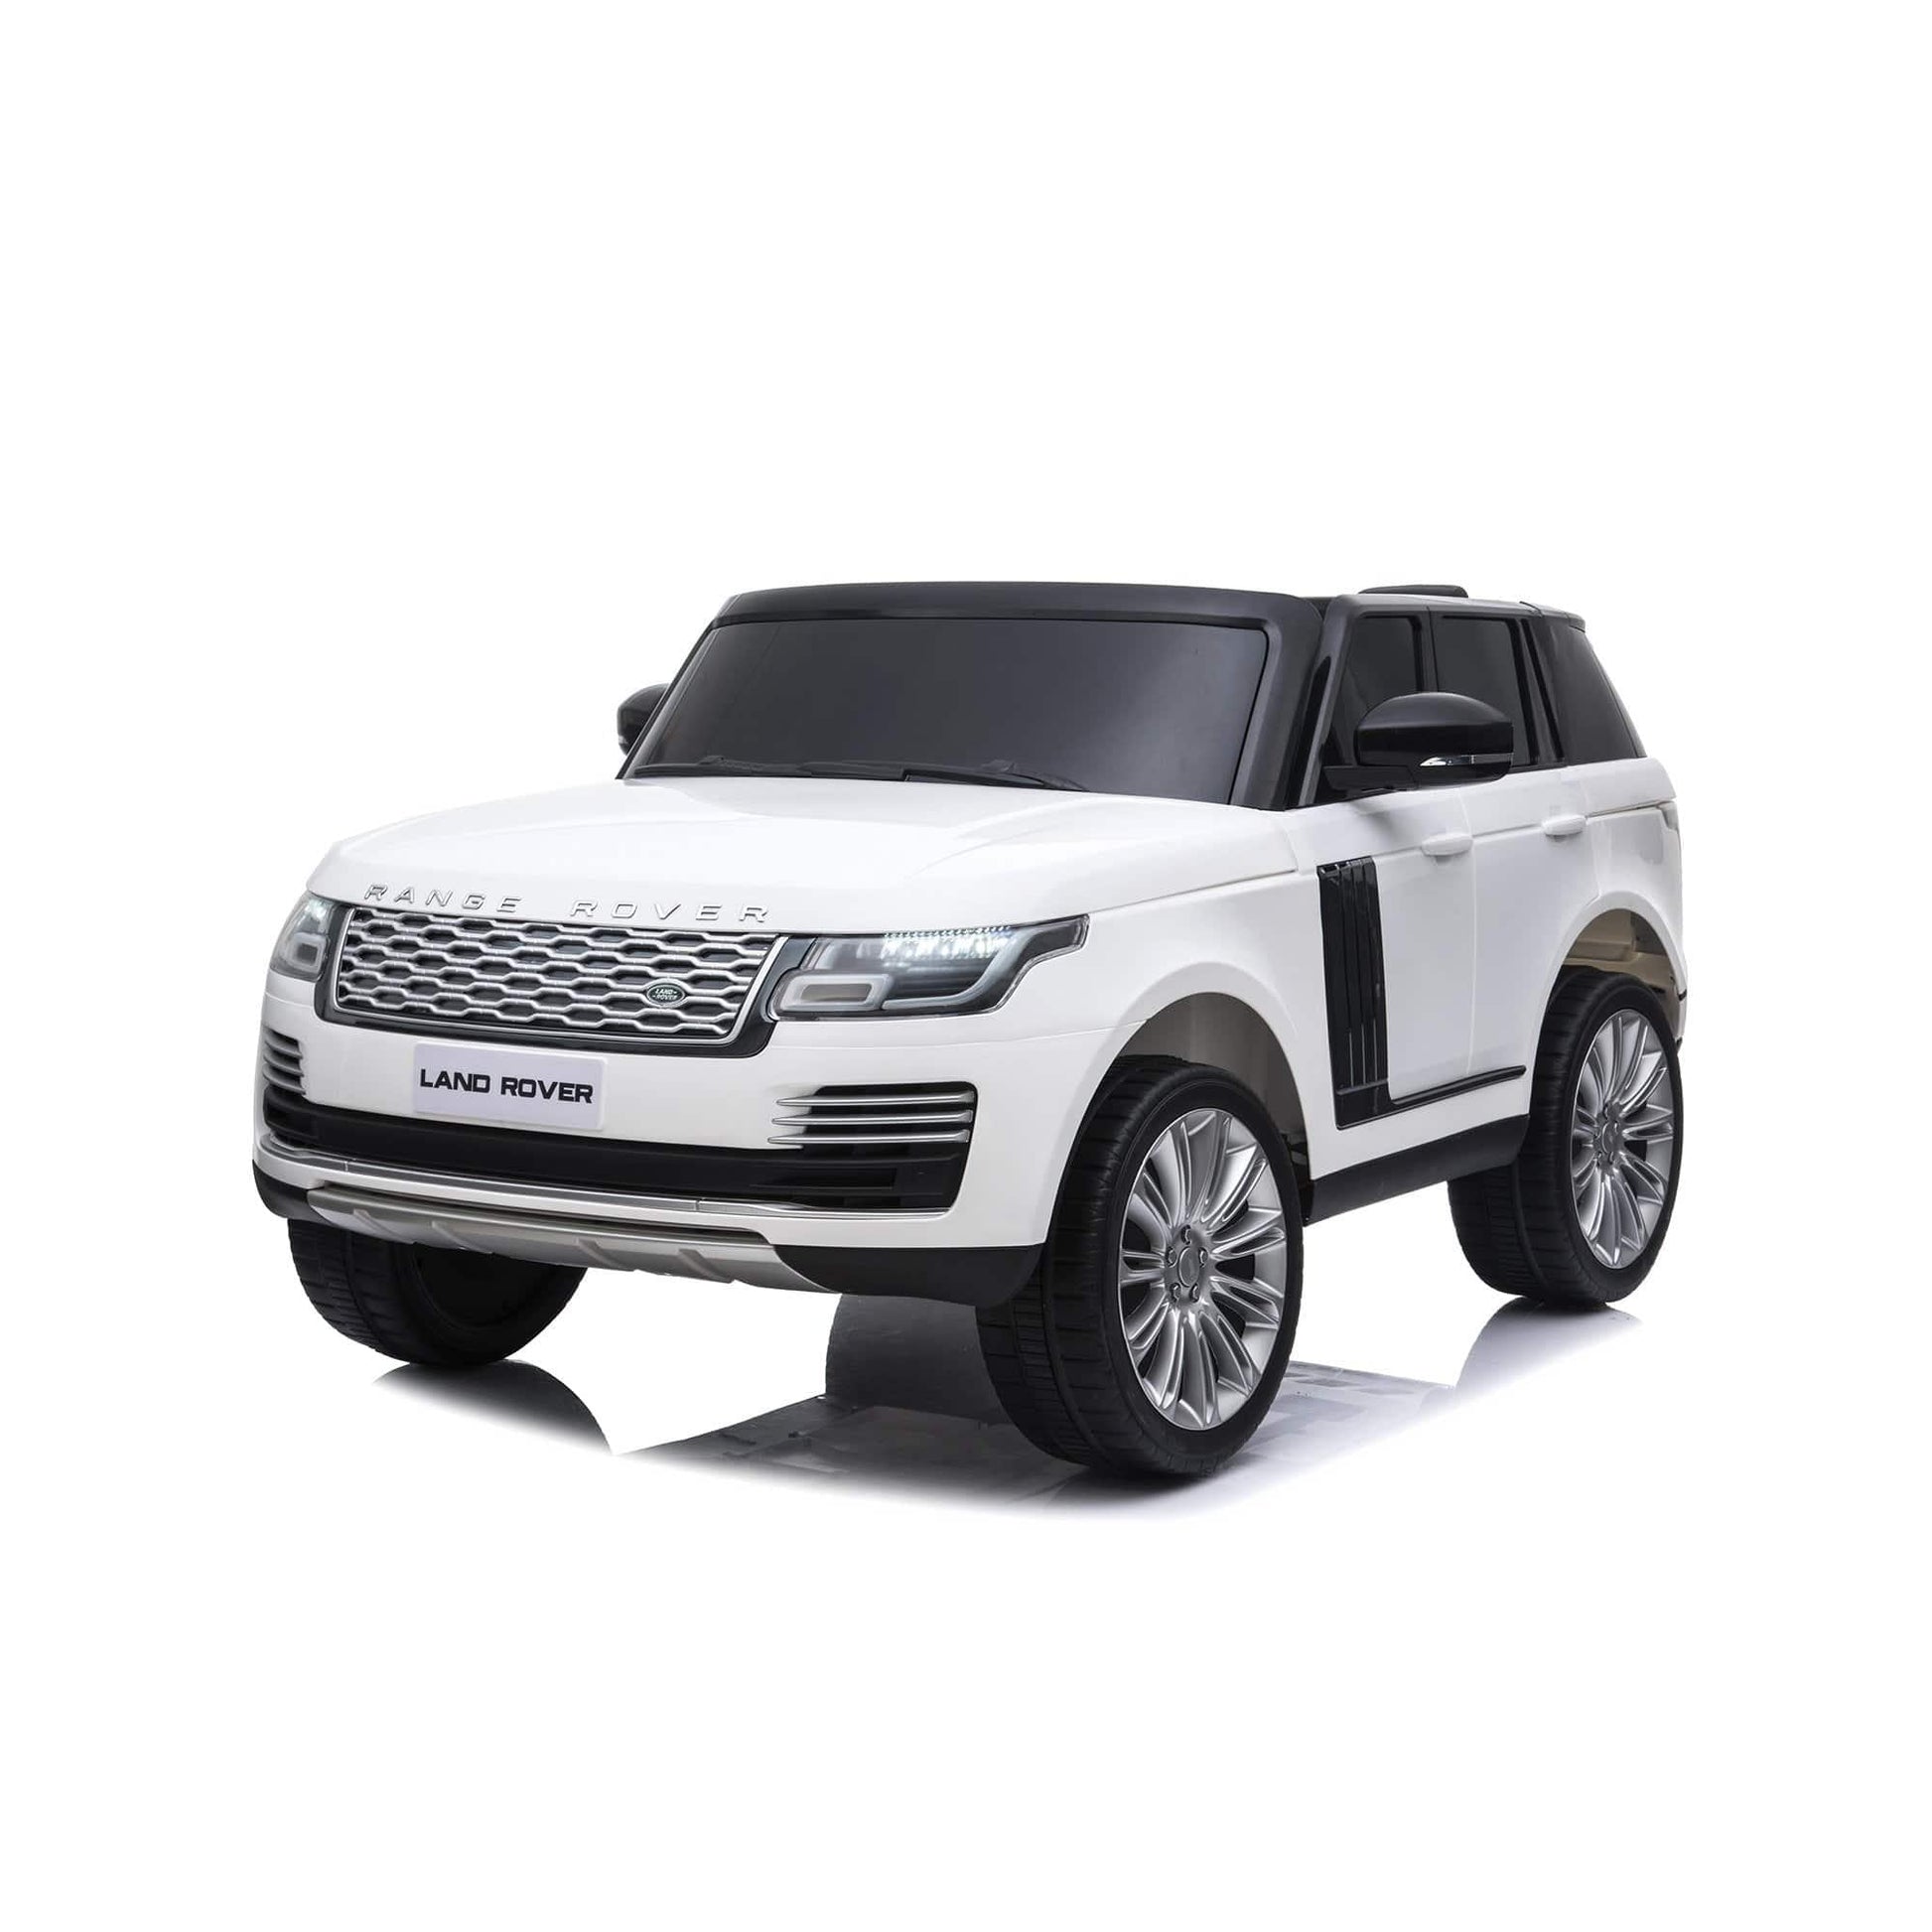 12V Range Rover HSE 2 Seater Ride on Car - Dti Direct USA